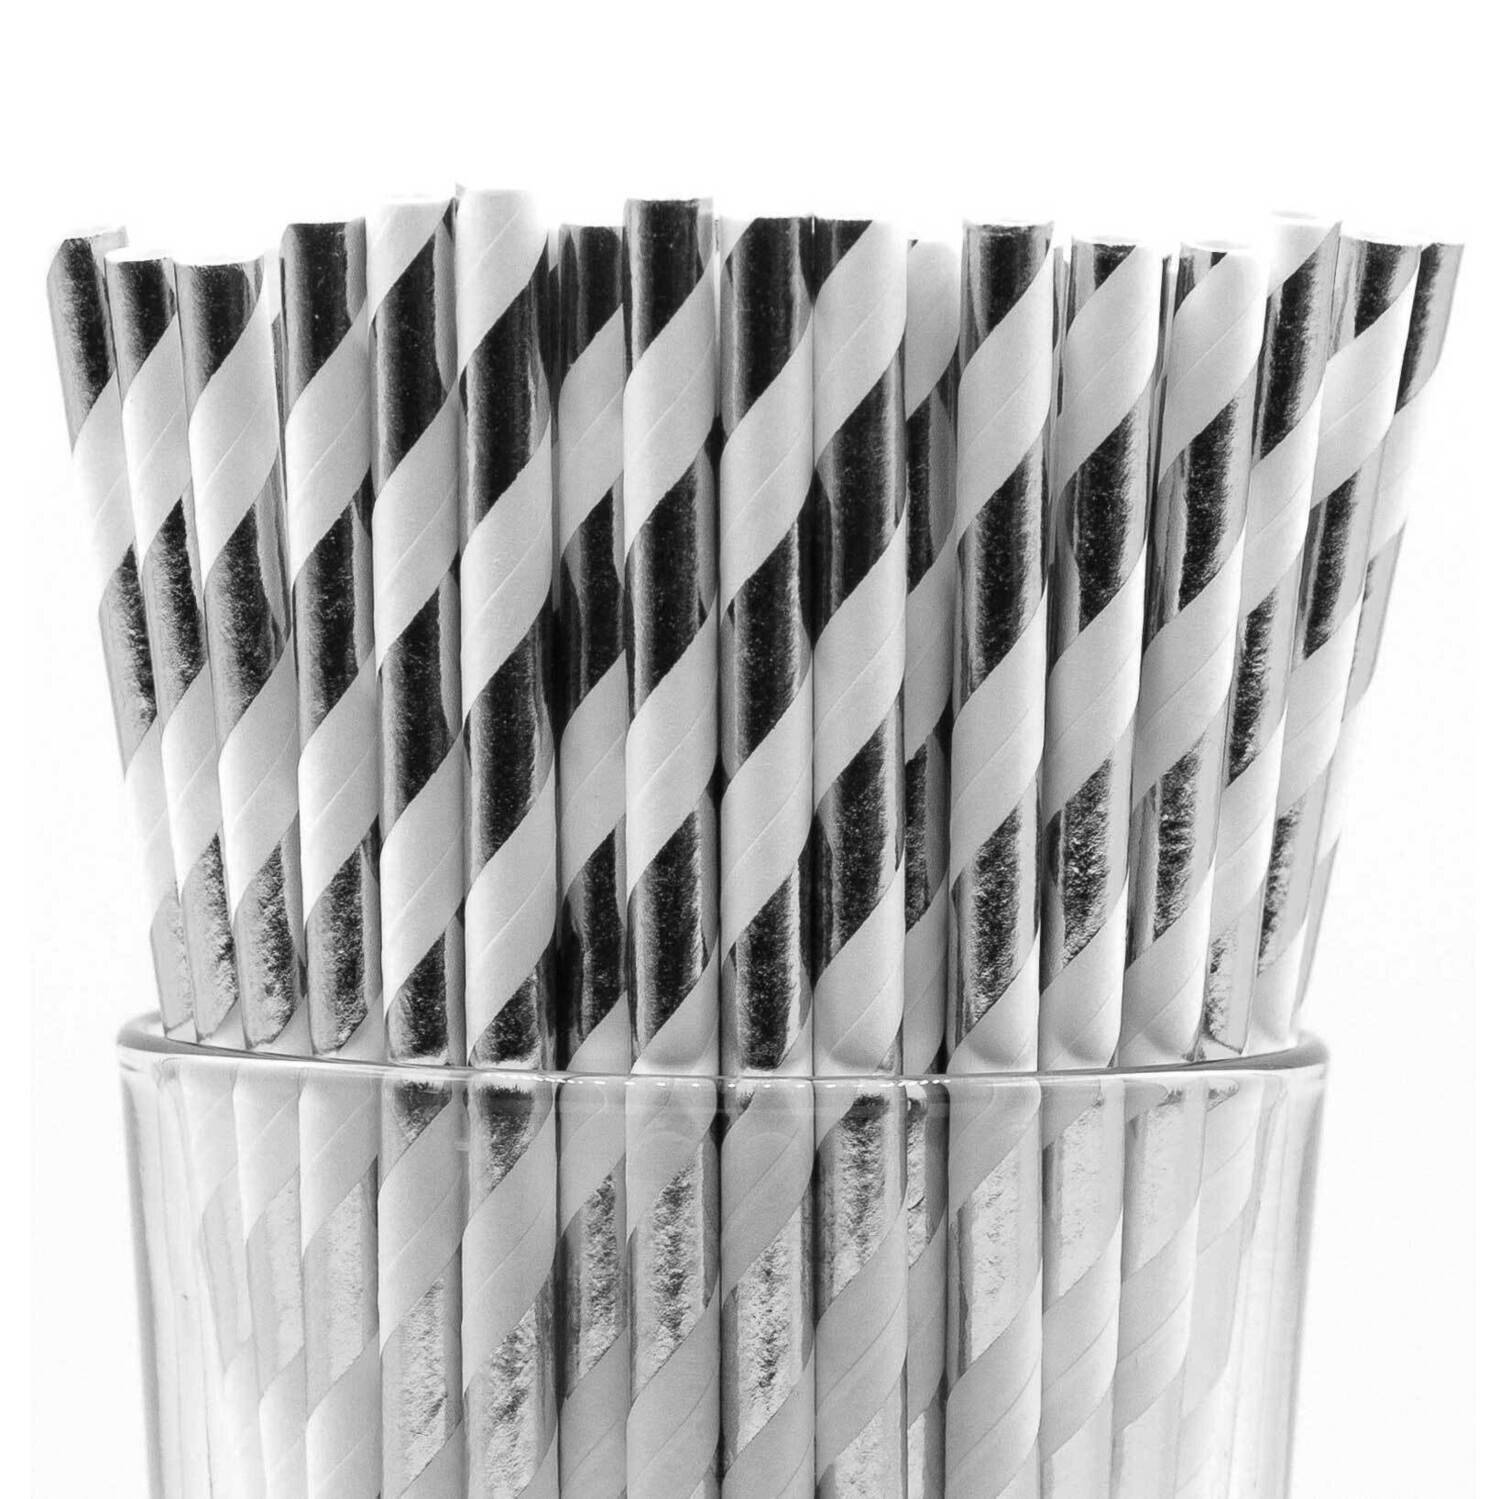 Pack of 150 Shiny Silver Wide Stripe Bio-degradable Paper Straws GM22609